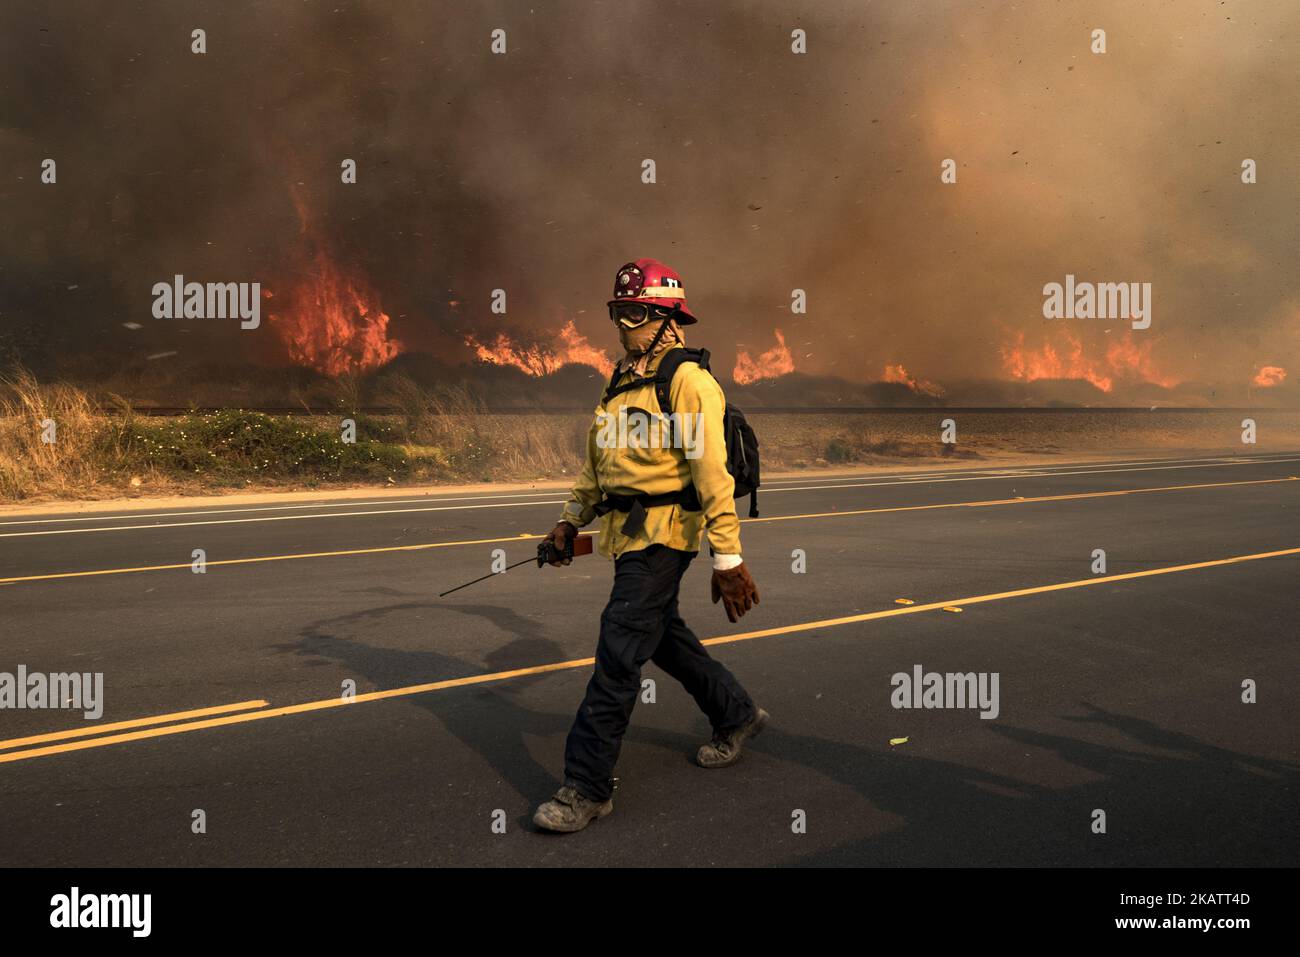 A firefighter at the Thomas wildfire in Ventura, California on December 7, 2017. Firefighters across Southern California are battling six major fires that are fueled by strong Santa Ana winds with wind gusts of 70 miles per hour. (Photo by Ronen Tivony/NurPhoto) Stock Photo